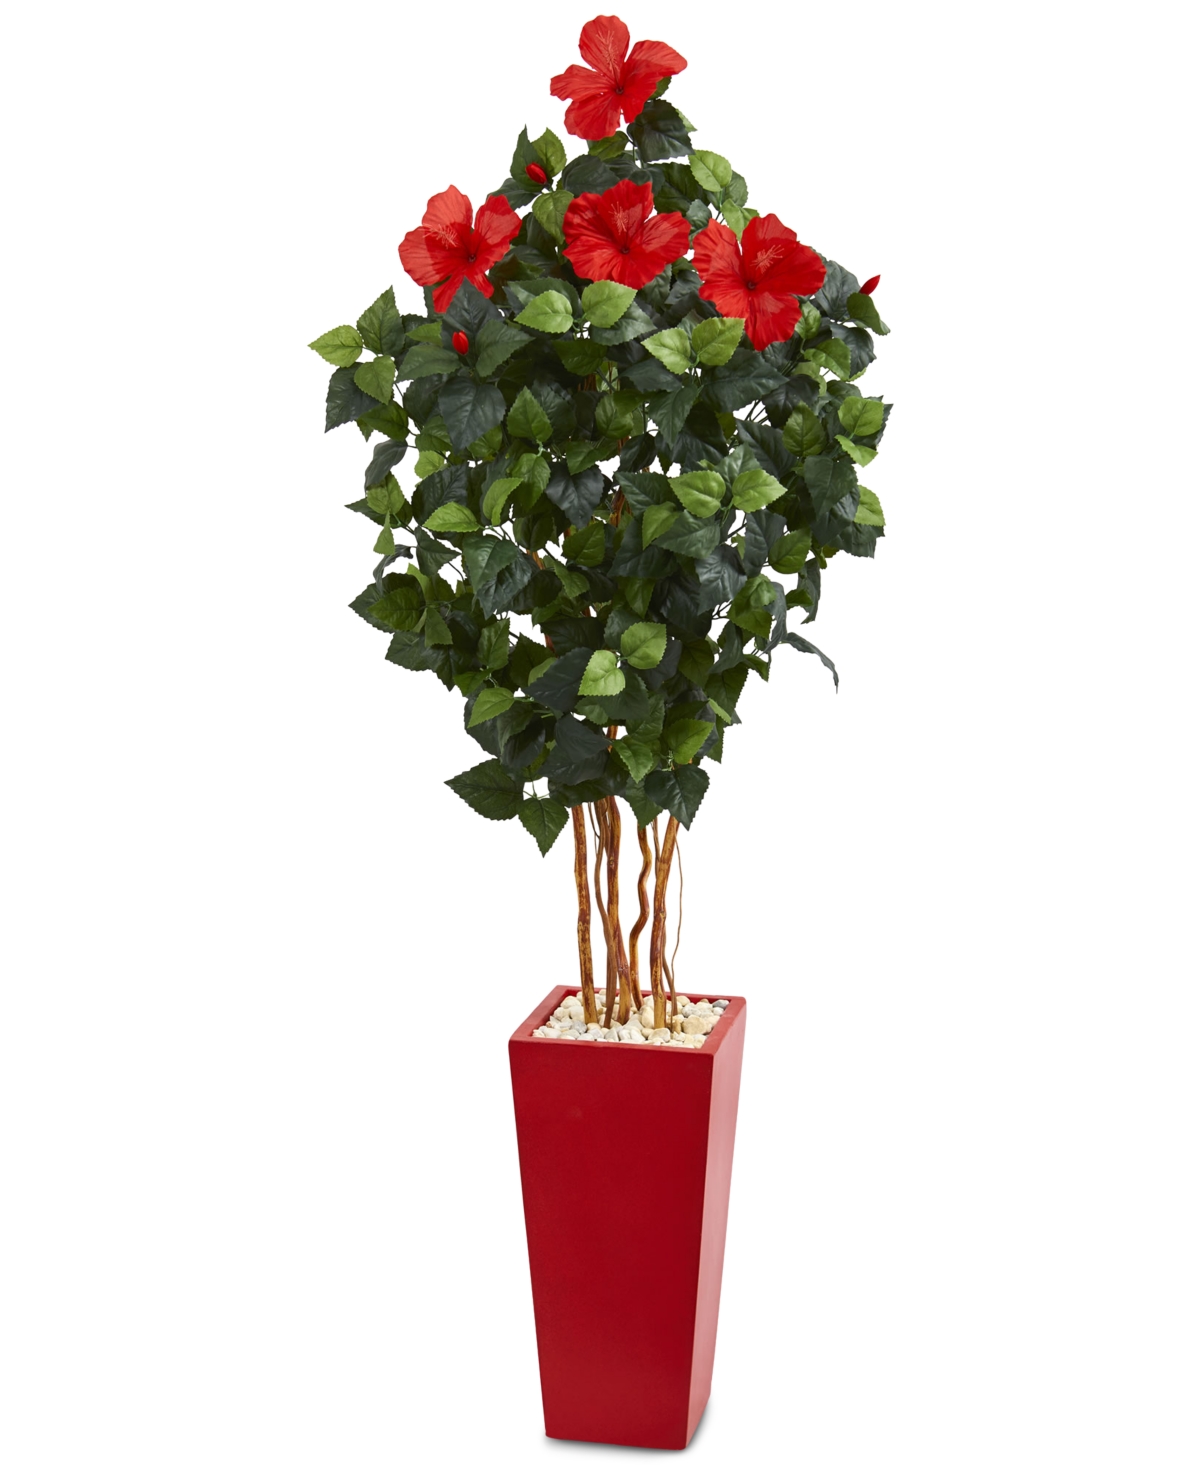 5.5' Hibiscus Artificial Tree in Red Tower Planter - Green